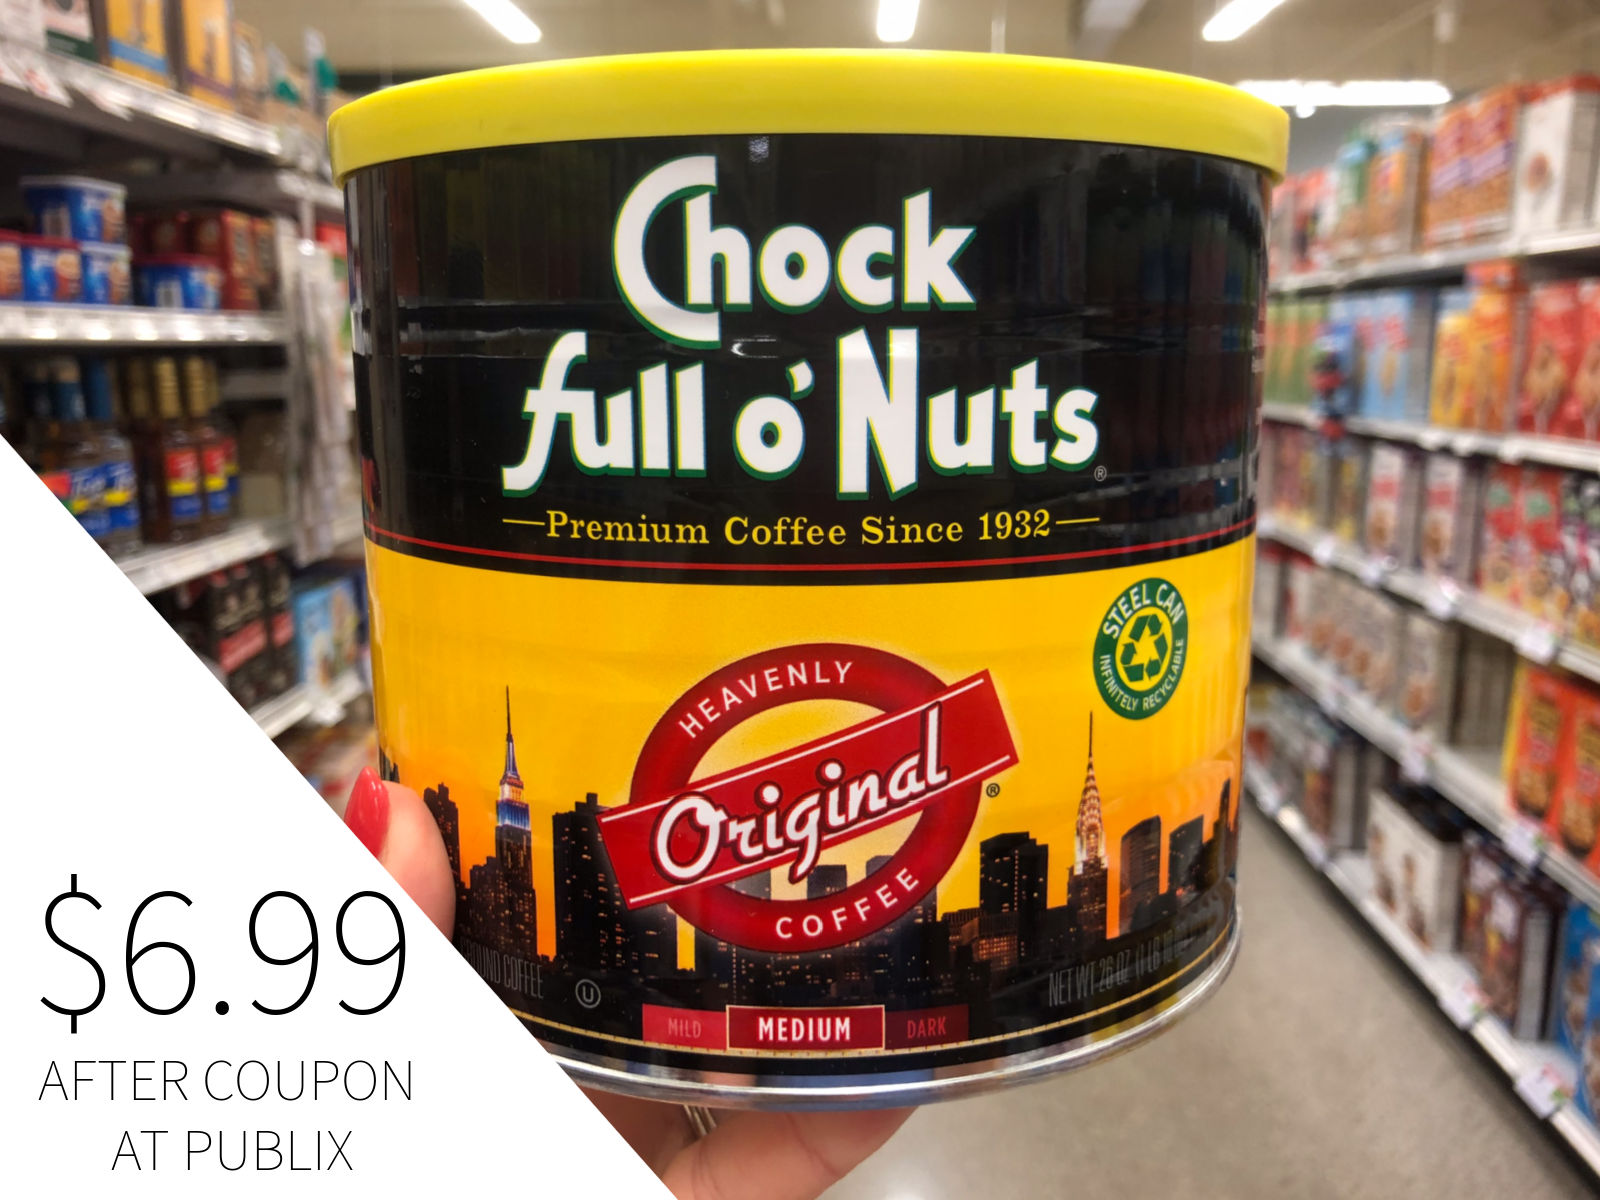 Enjoy The Perfect Cup Of Coffee – Save $2 On Chock full o’Nuts® At Publix